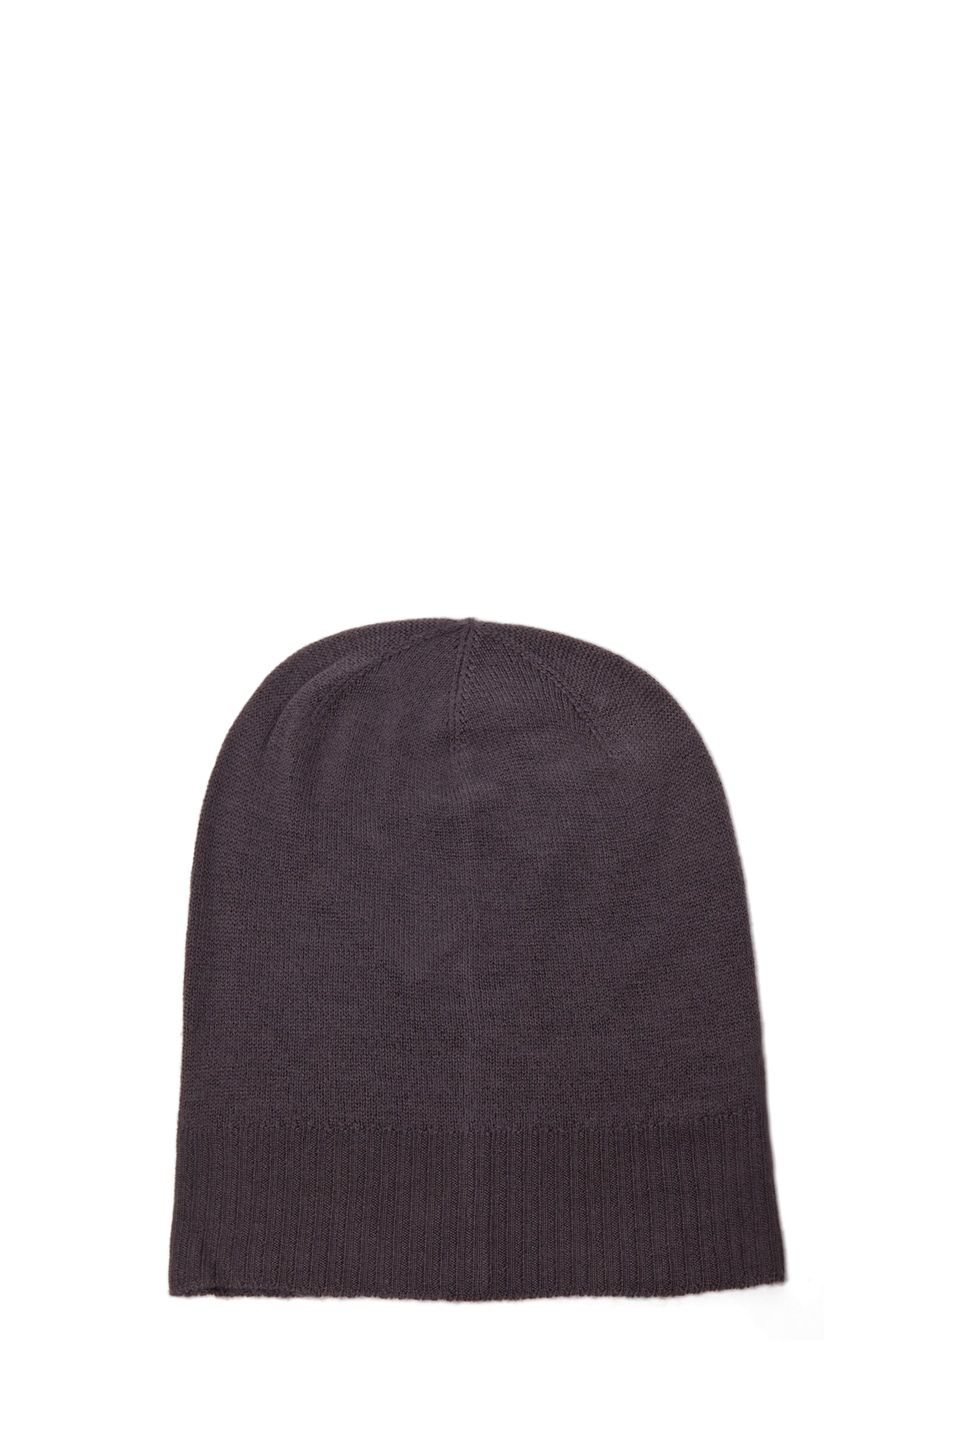 Image 1 of Rick Owens Hat in DNA Dust